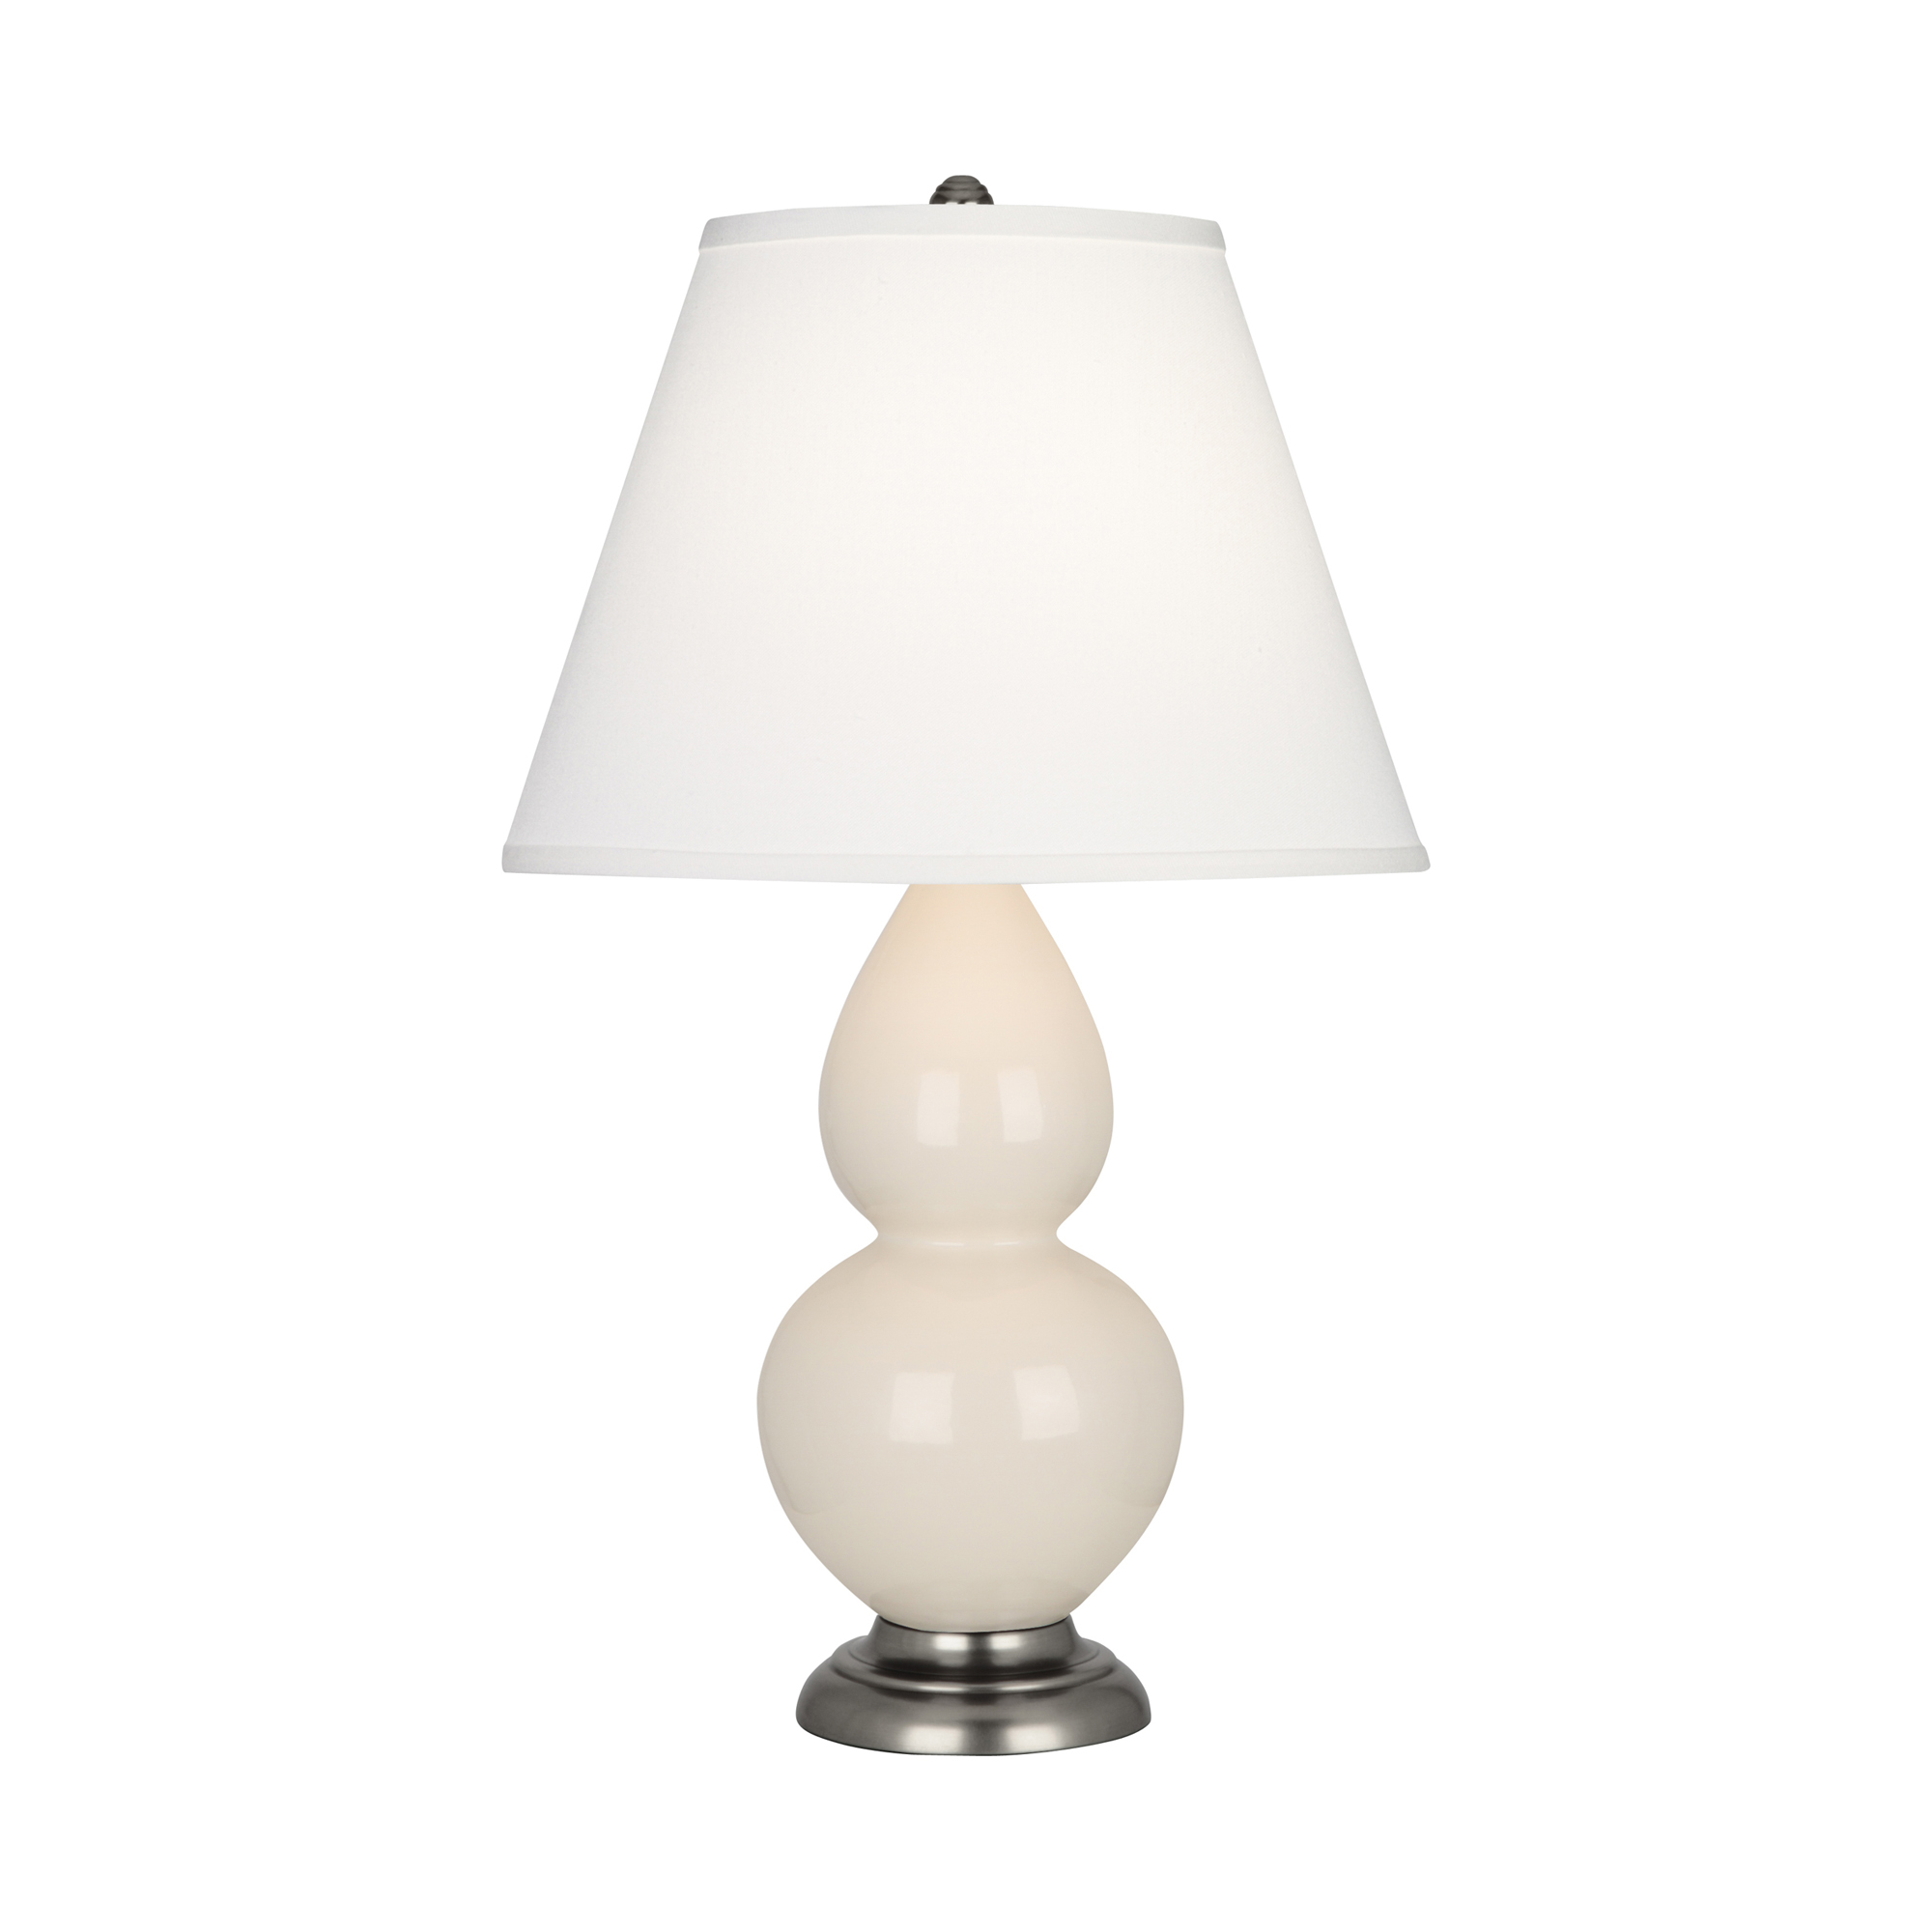 Small Double Gourd Accent Lamp Style #1776X